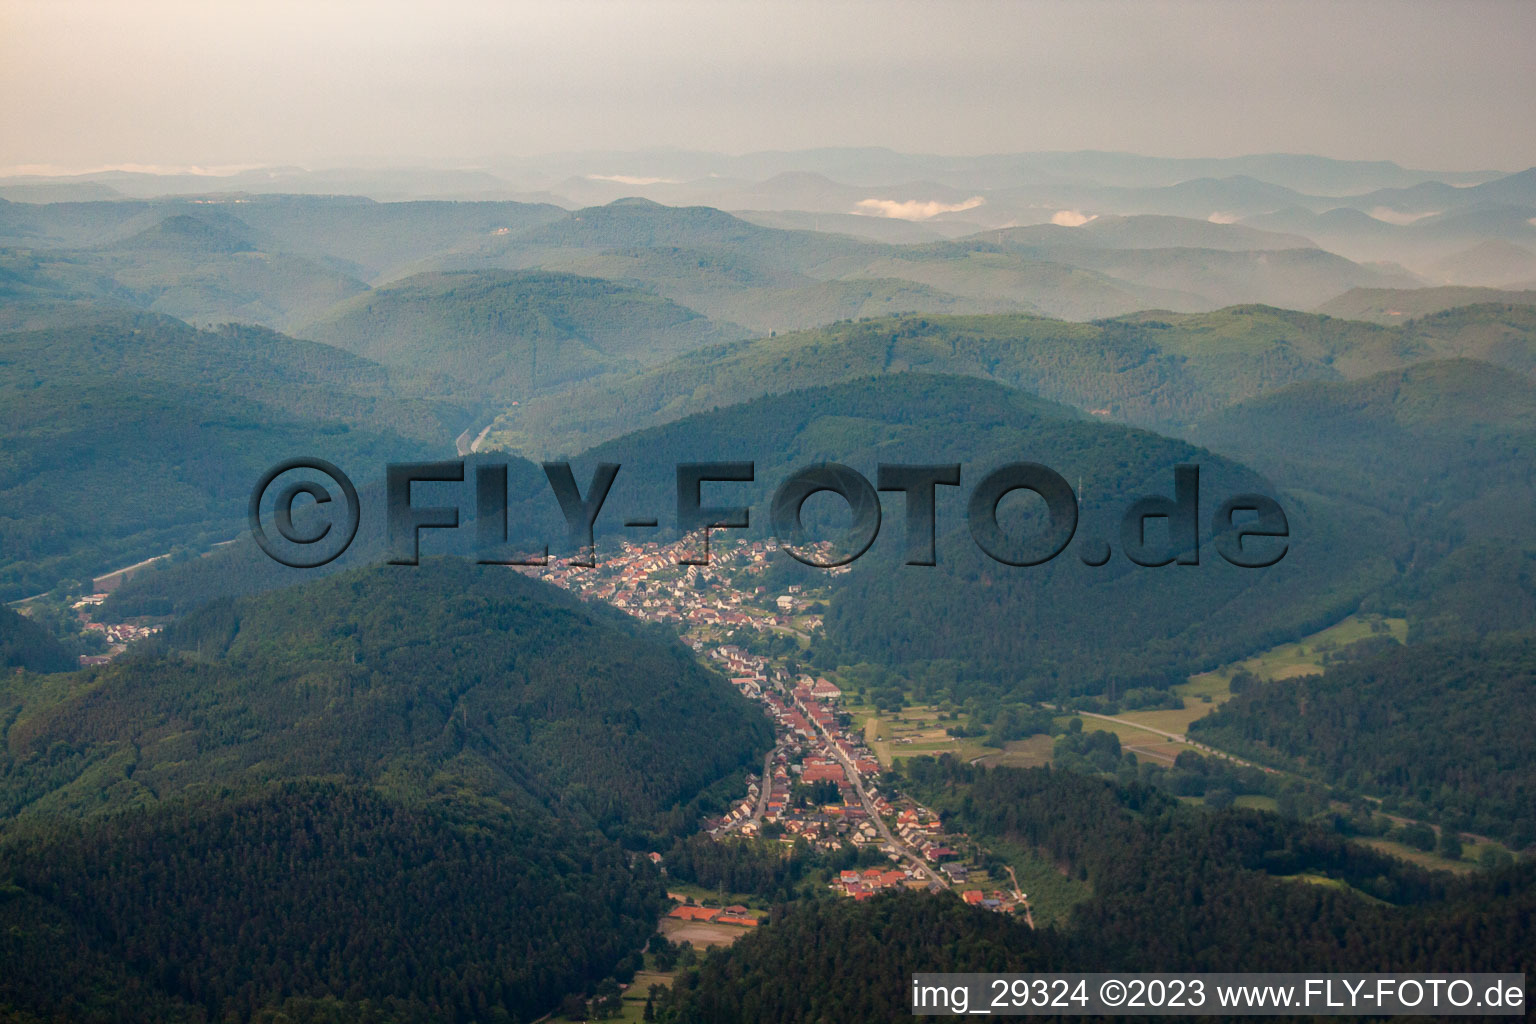 Hinterweidenthal in the state Rhineland-Palatinate, Germany seen from a drone